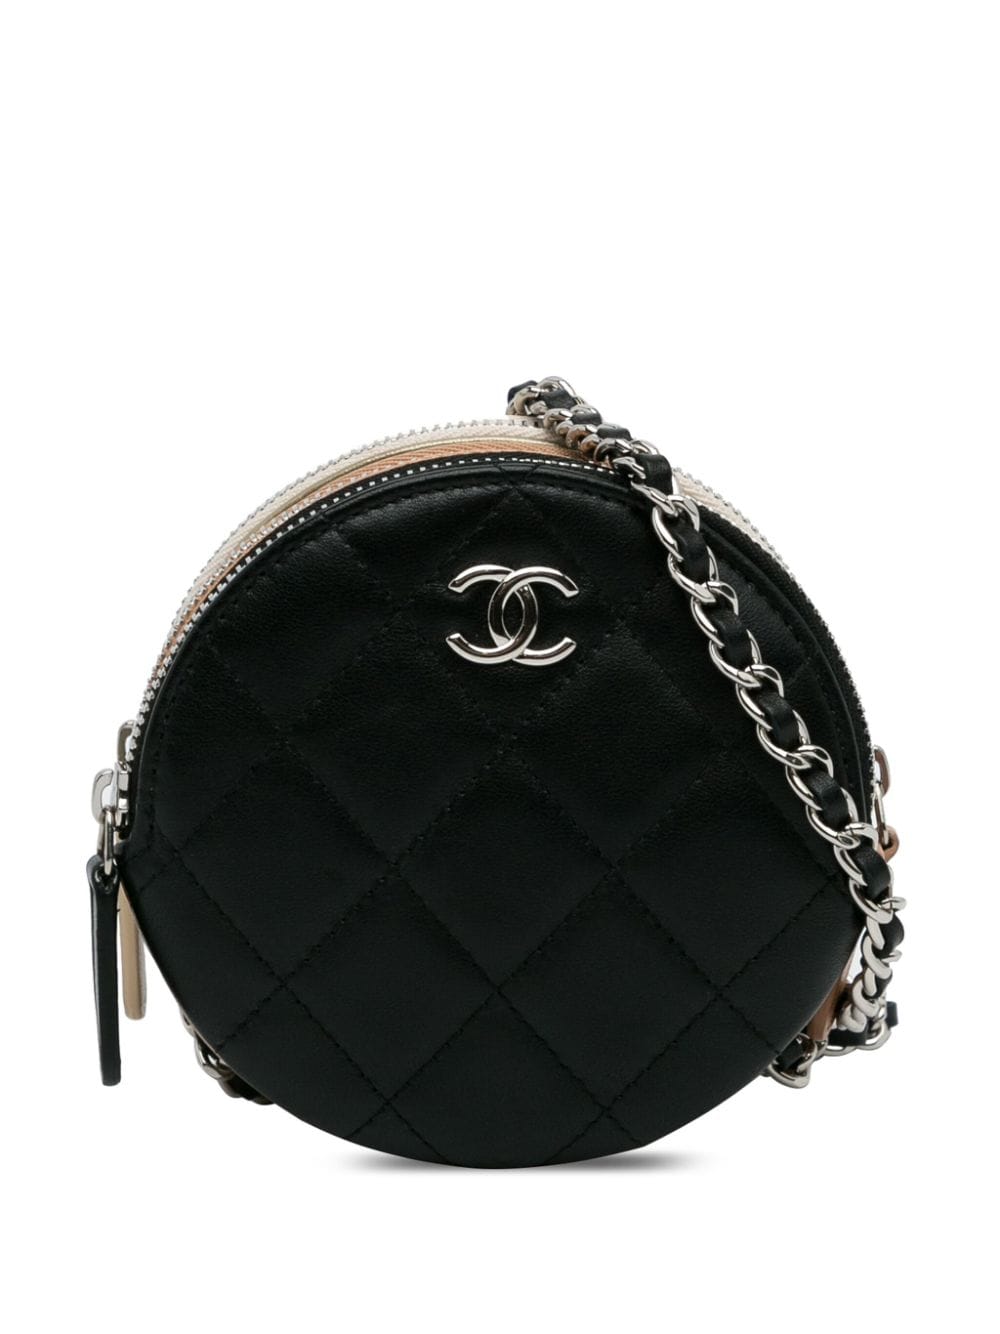 Pre-owned Chanel 2019 Cc Round Triple Zip Crossbody Bag In Black